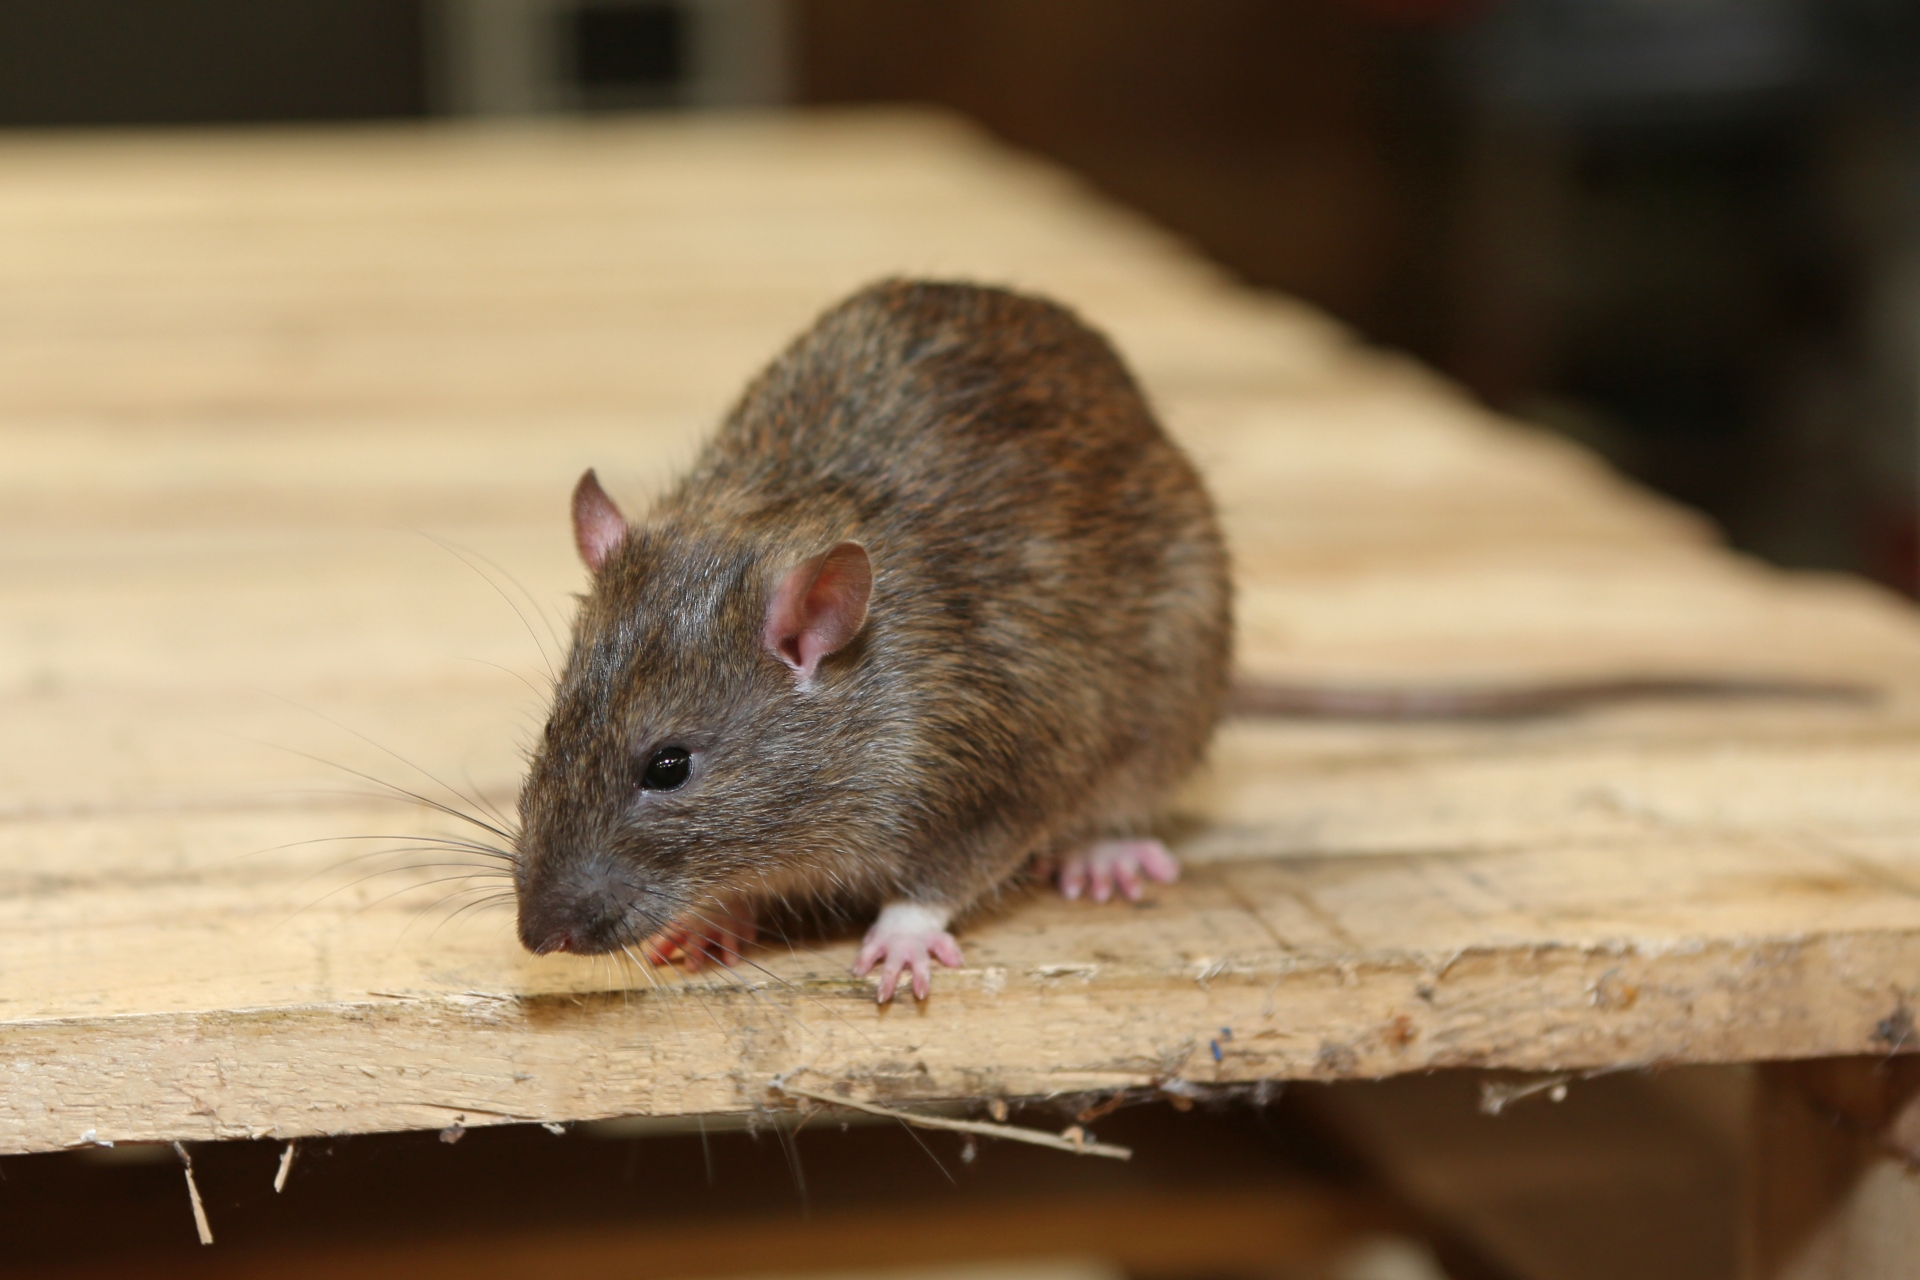 Rat Infestation, Pest Control in Stockwell, SW9. Call Now 020 8166 9746